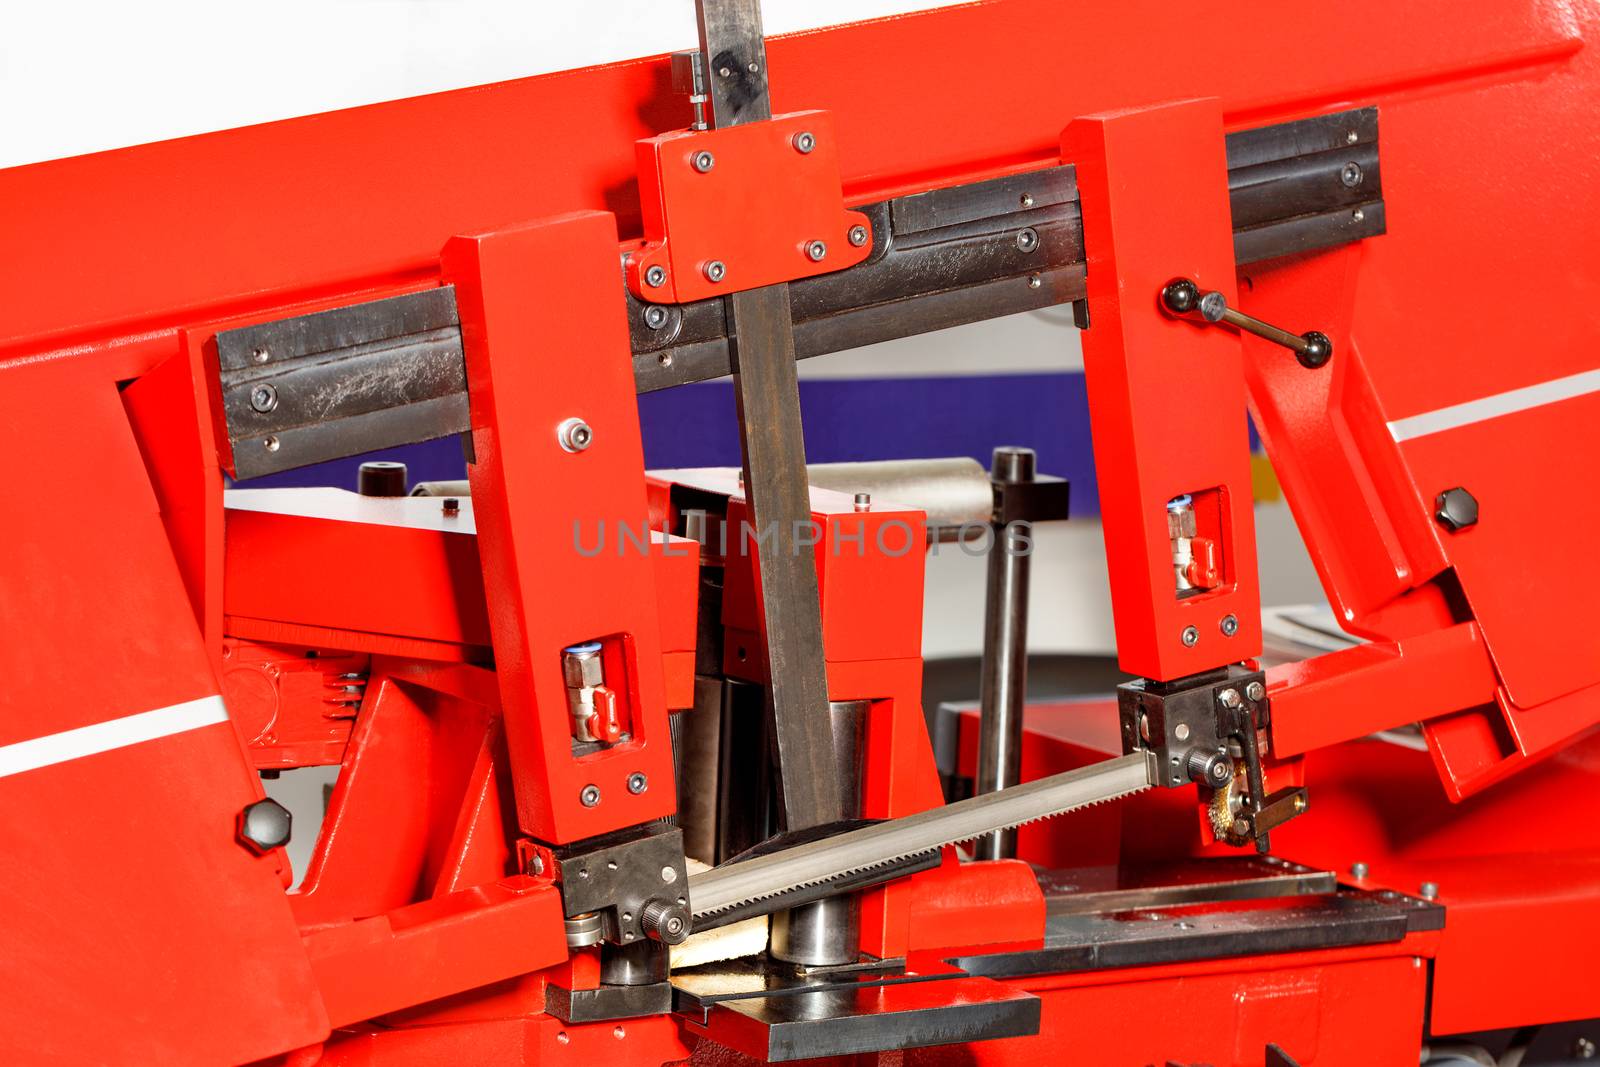 The sharp teeth of the band saw on the modern red metal working machine ensure high cutting accuracy thanks to the adjusting line. Close-up.